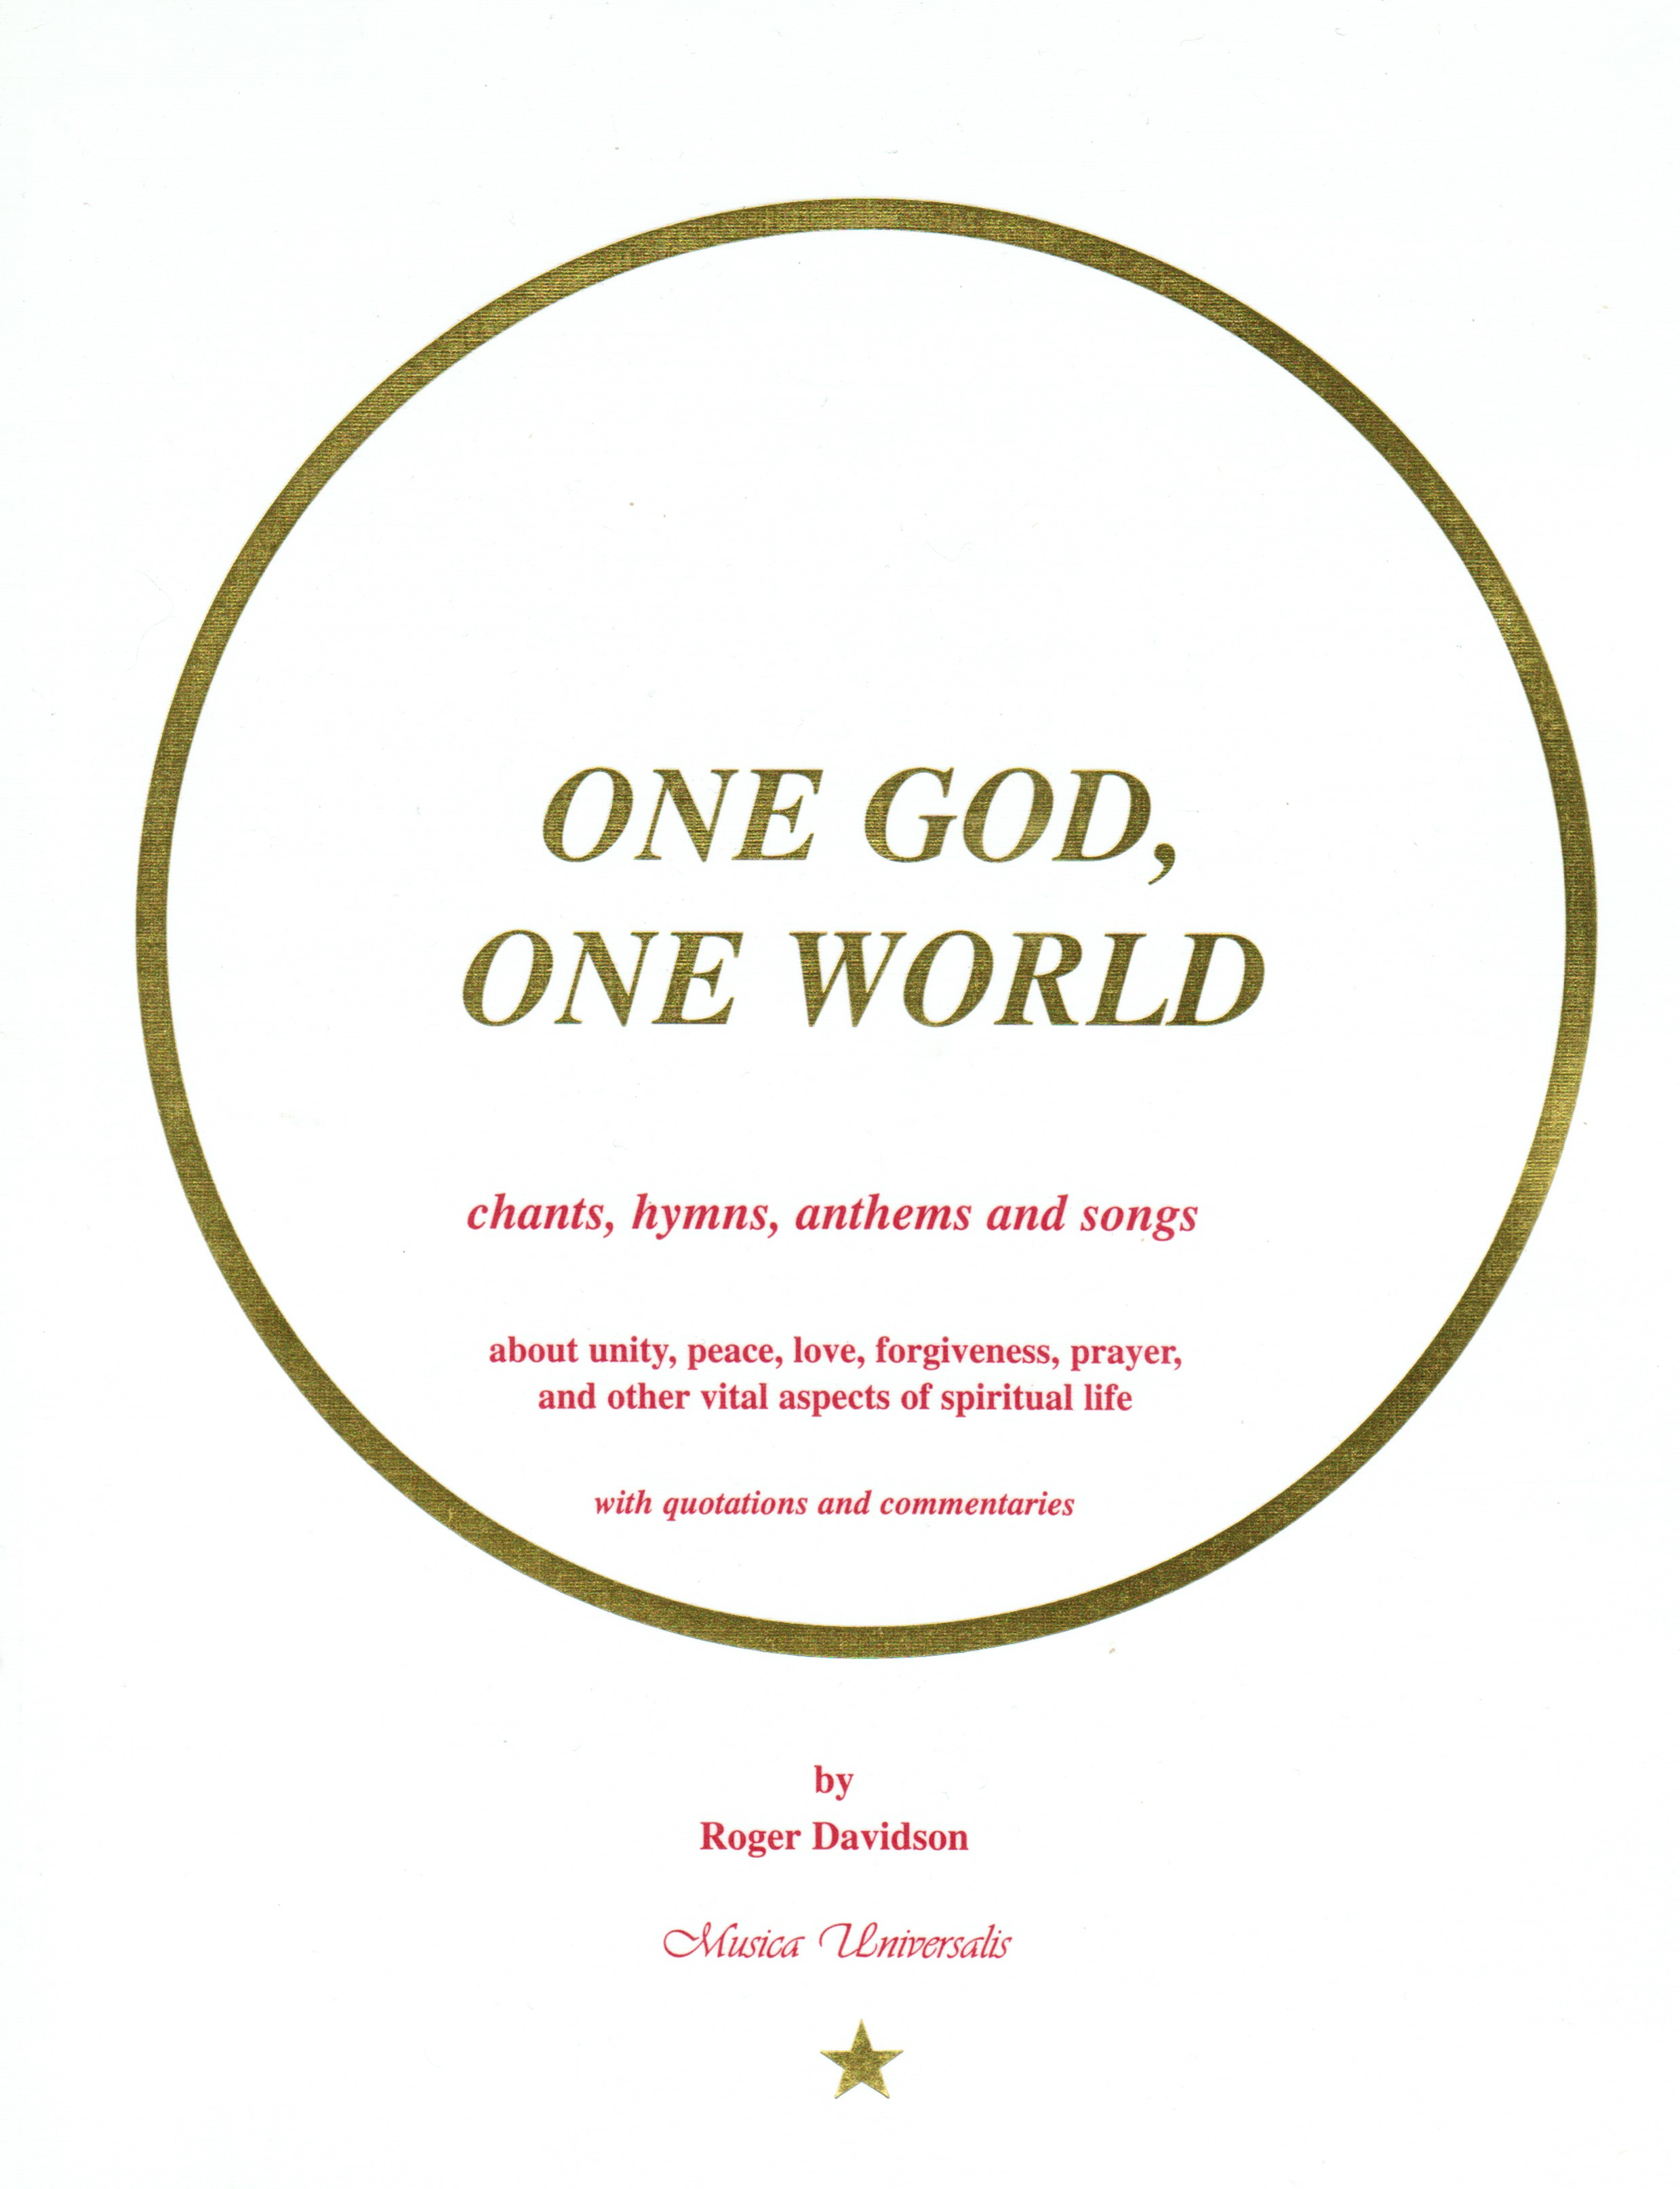 One God, One World: chants, hymns, anthems and songs about unity, peace, love, forgiveness, prayer, and other vital aspects of spiritual life, is a beautiful 179-page book by Roger Davidson.